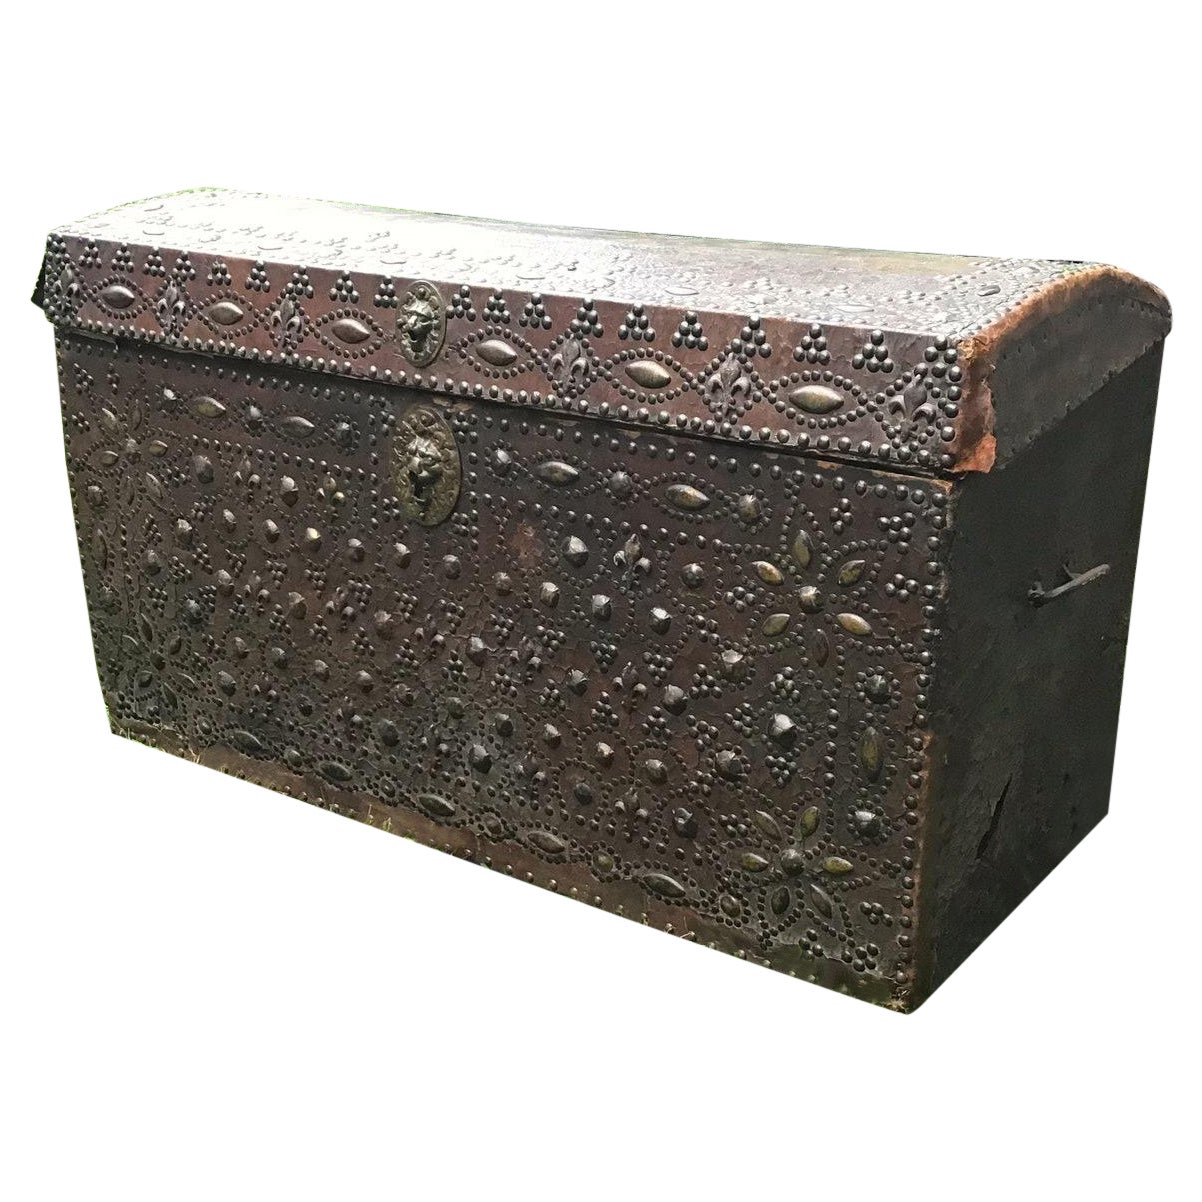 French Traveling Trunk Domed Leather Brass Ornate Studded Fleur De Lys